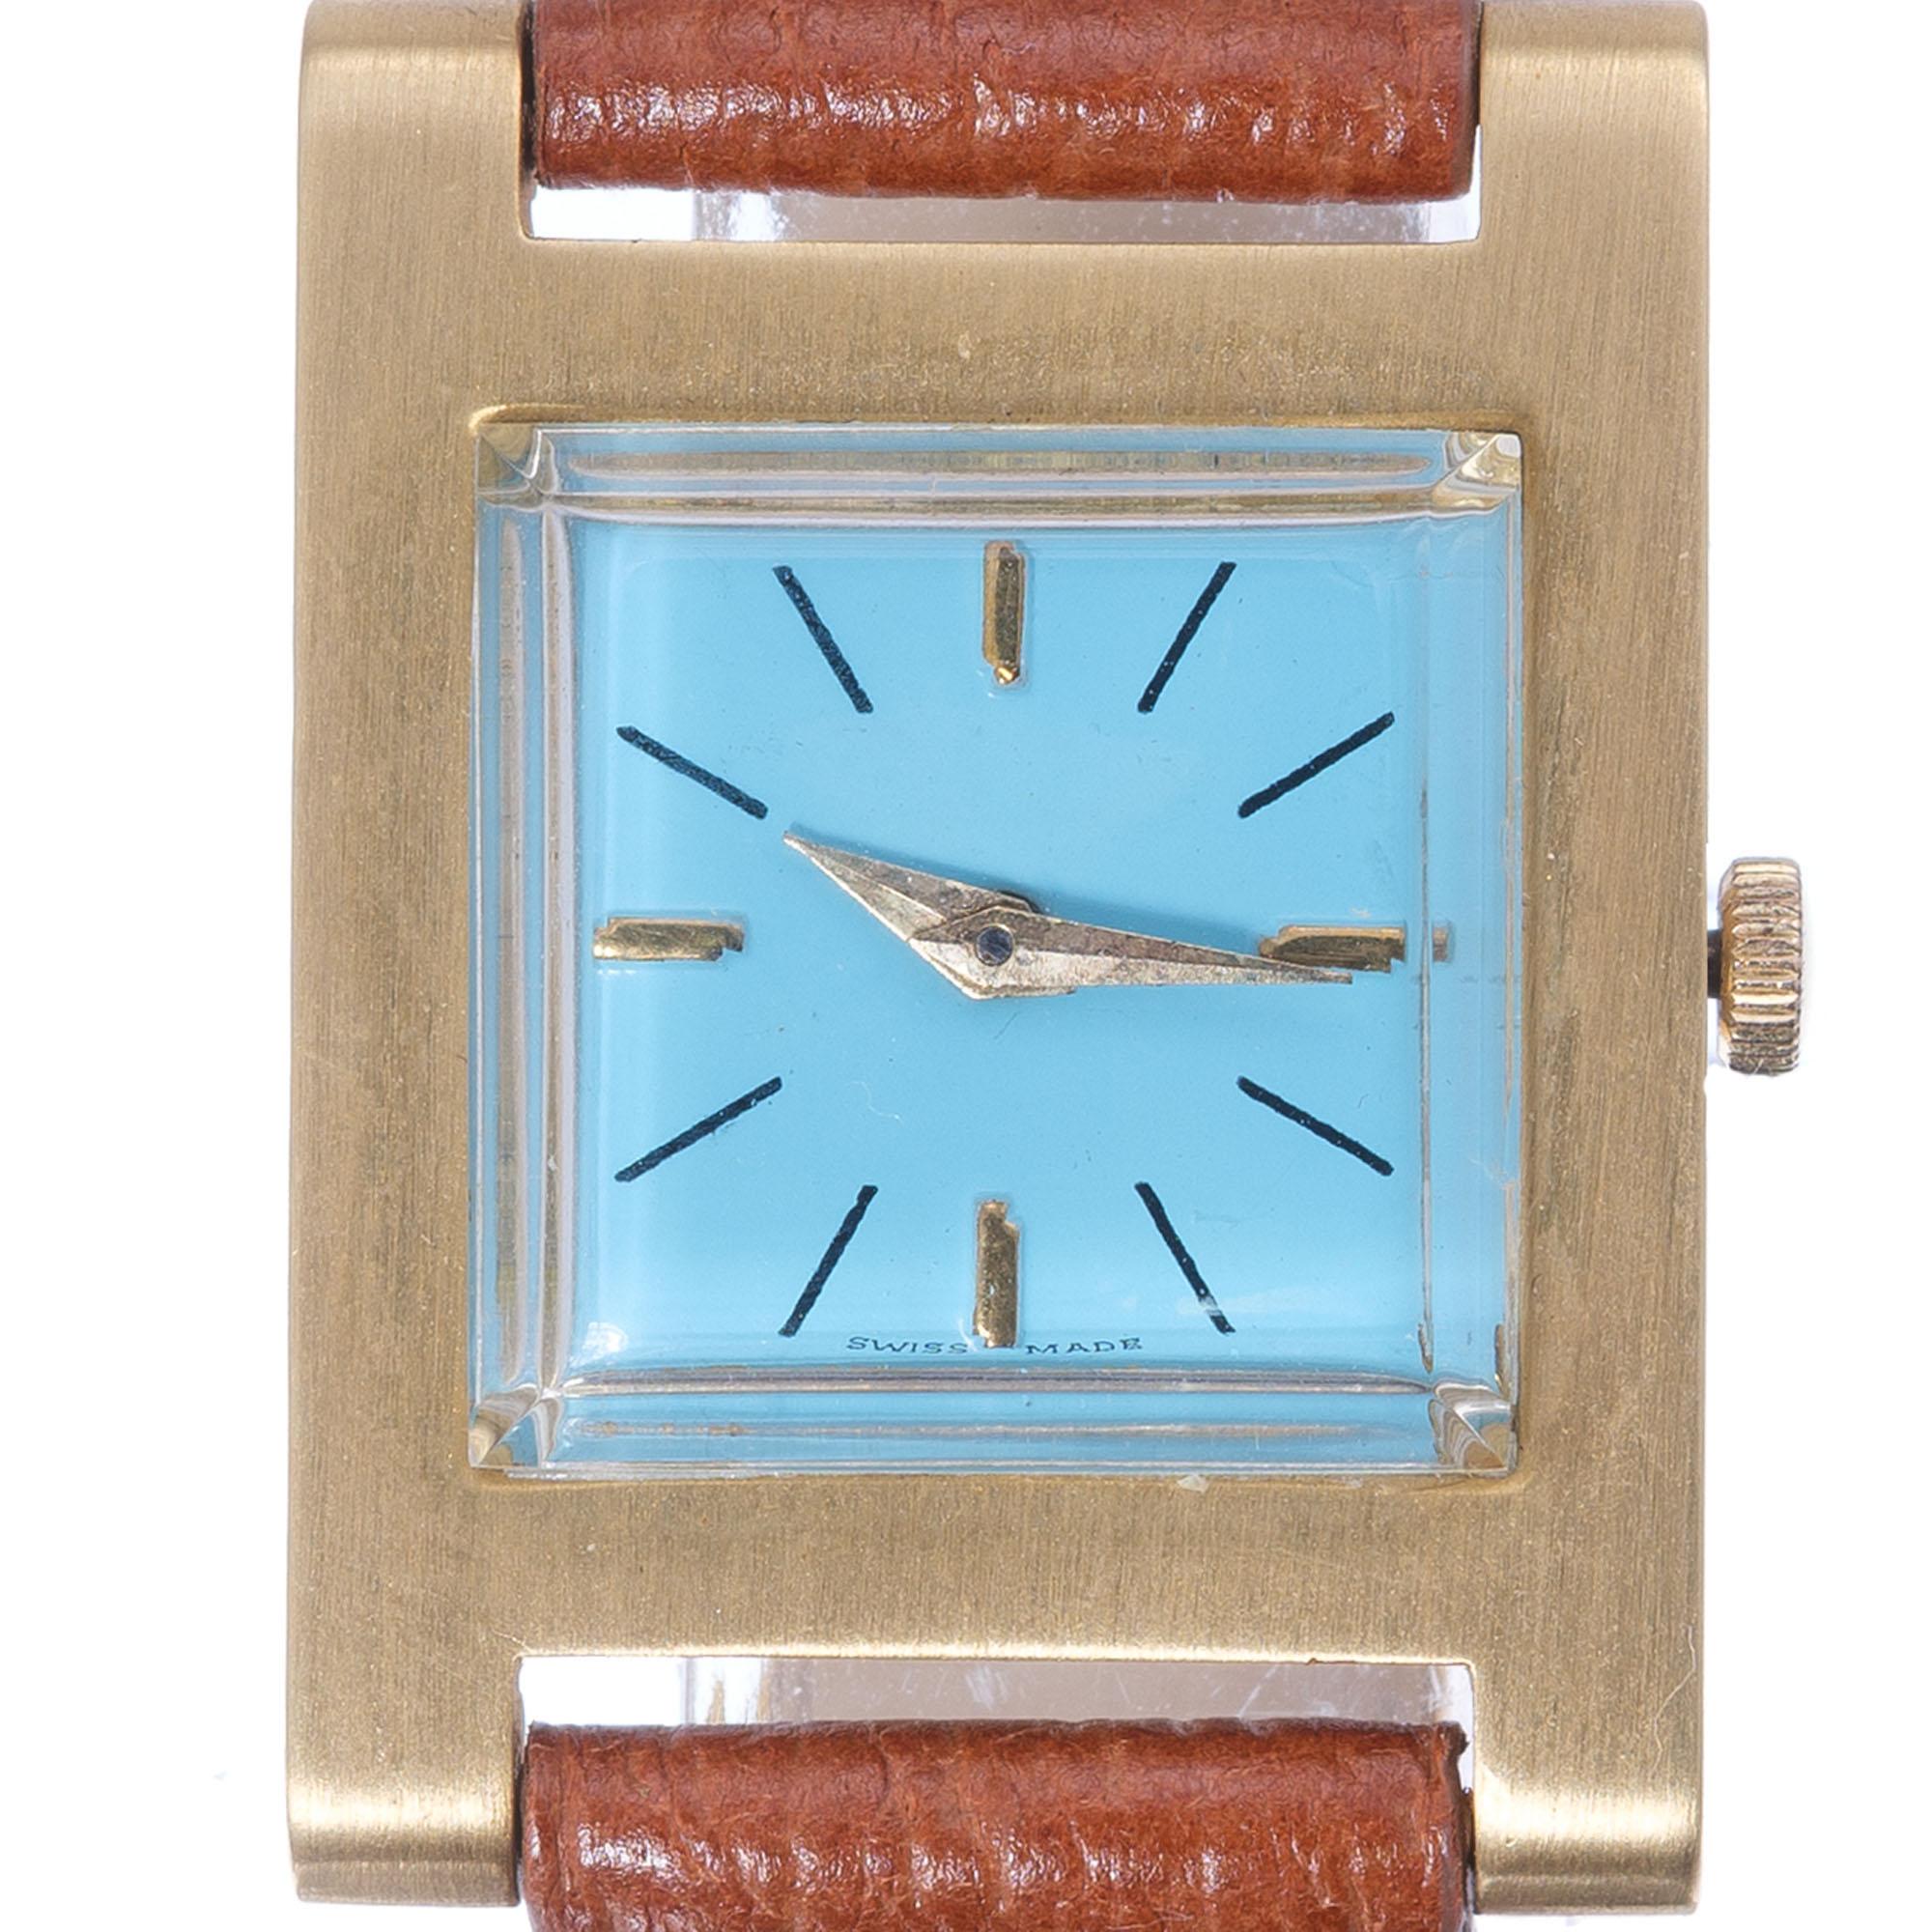 1950’s 18k yellow gold Swiss Jules Jurgensen wristwatch with original dial refinished and custom colored a bright Robin’s egg Turquoise blue. While originally a man’s watch this is perfect for a woman’s wrist. “H: design case.

18k yellow gold
13.2